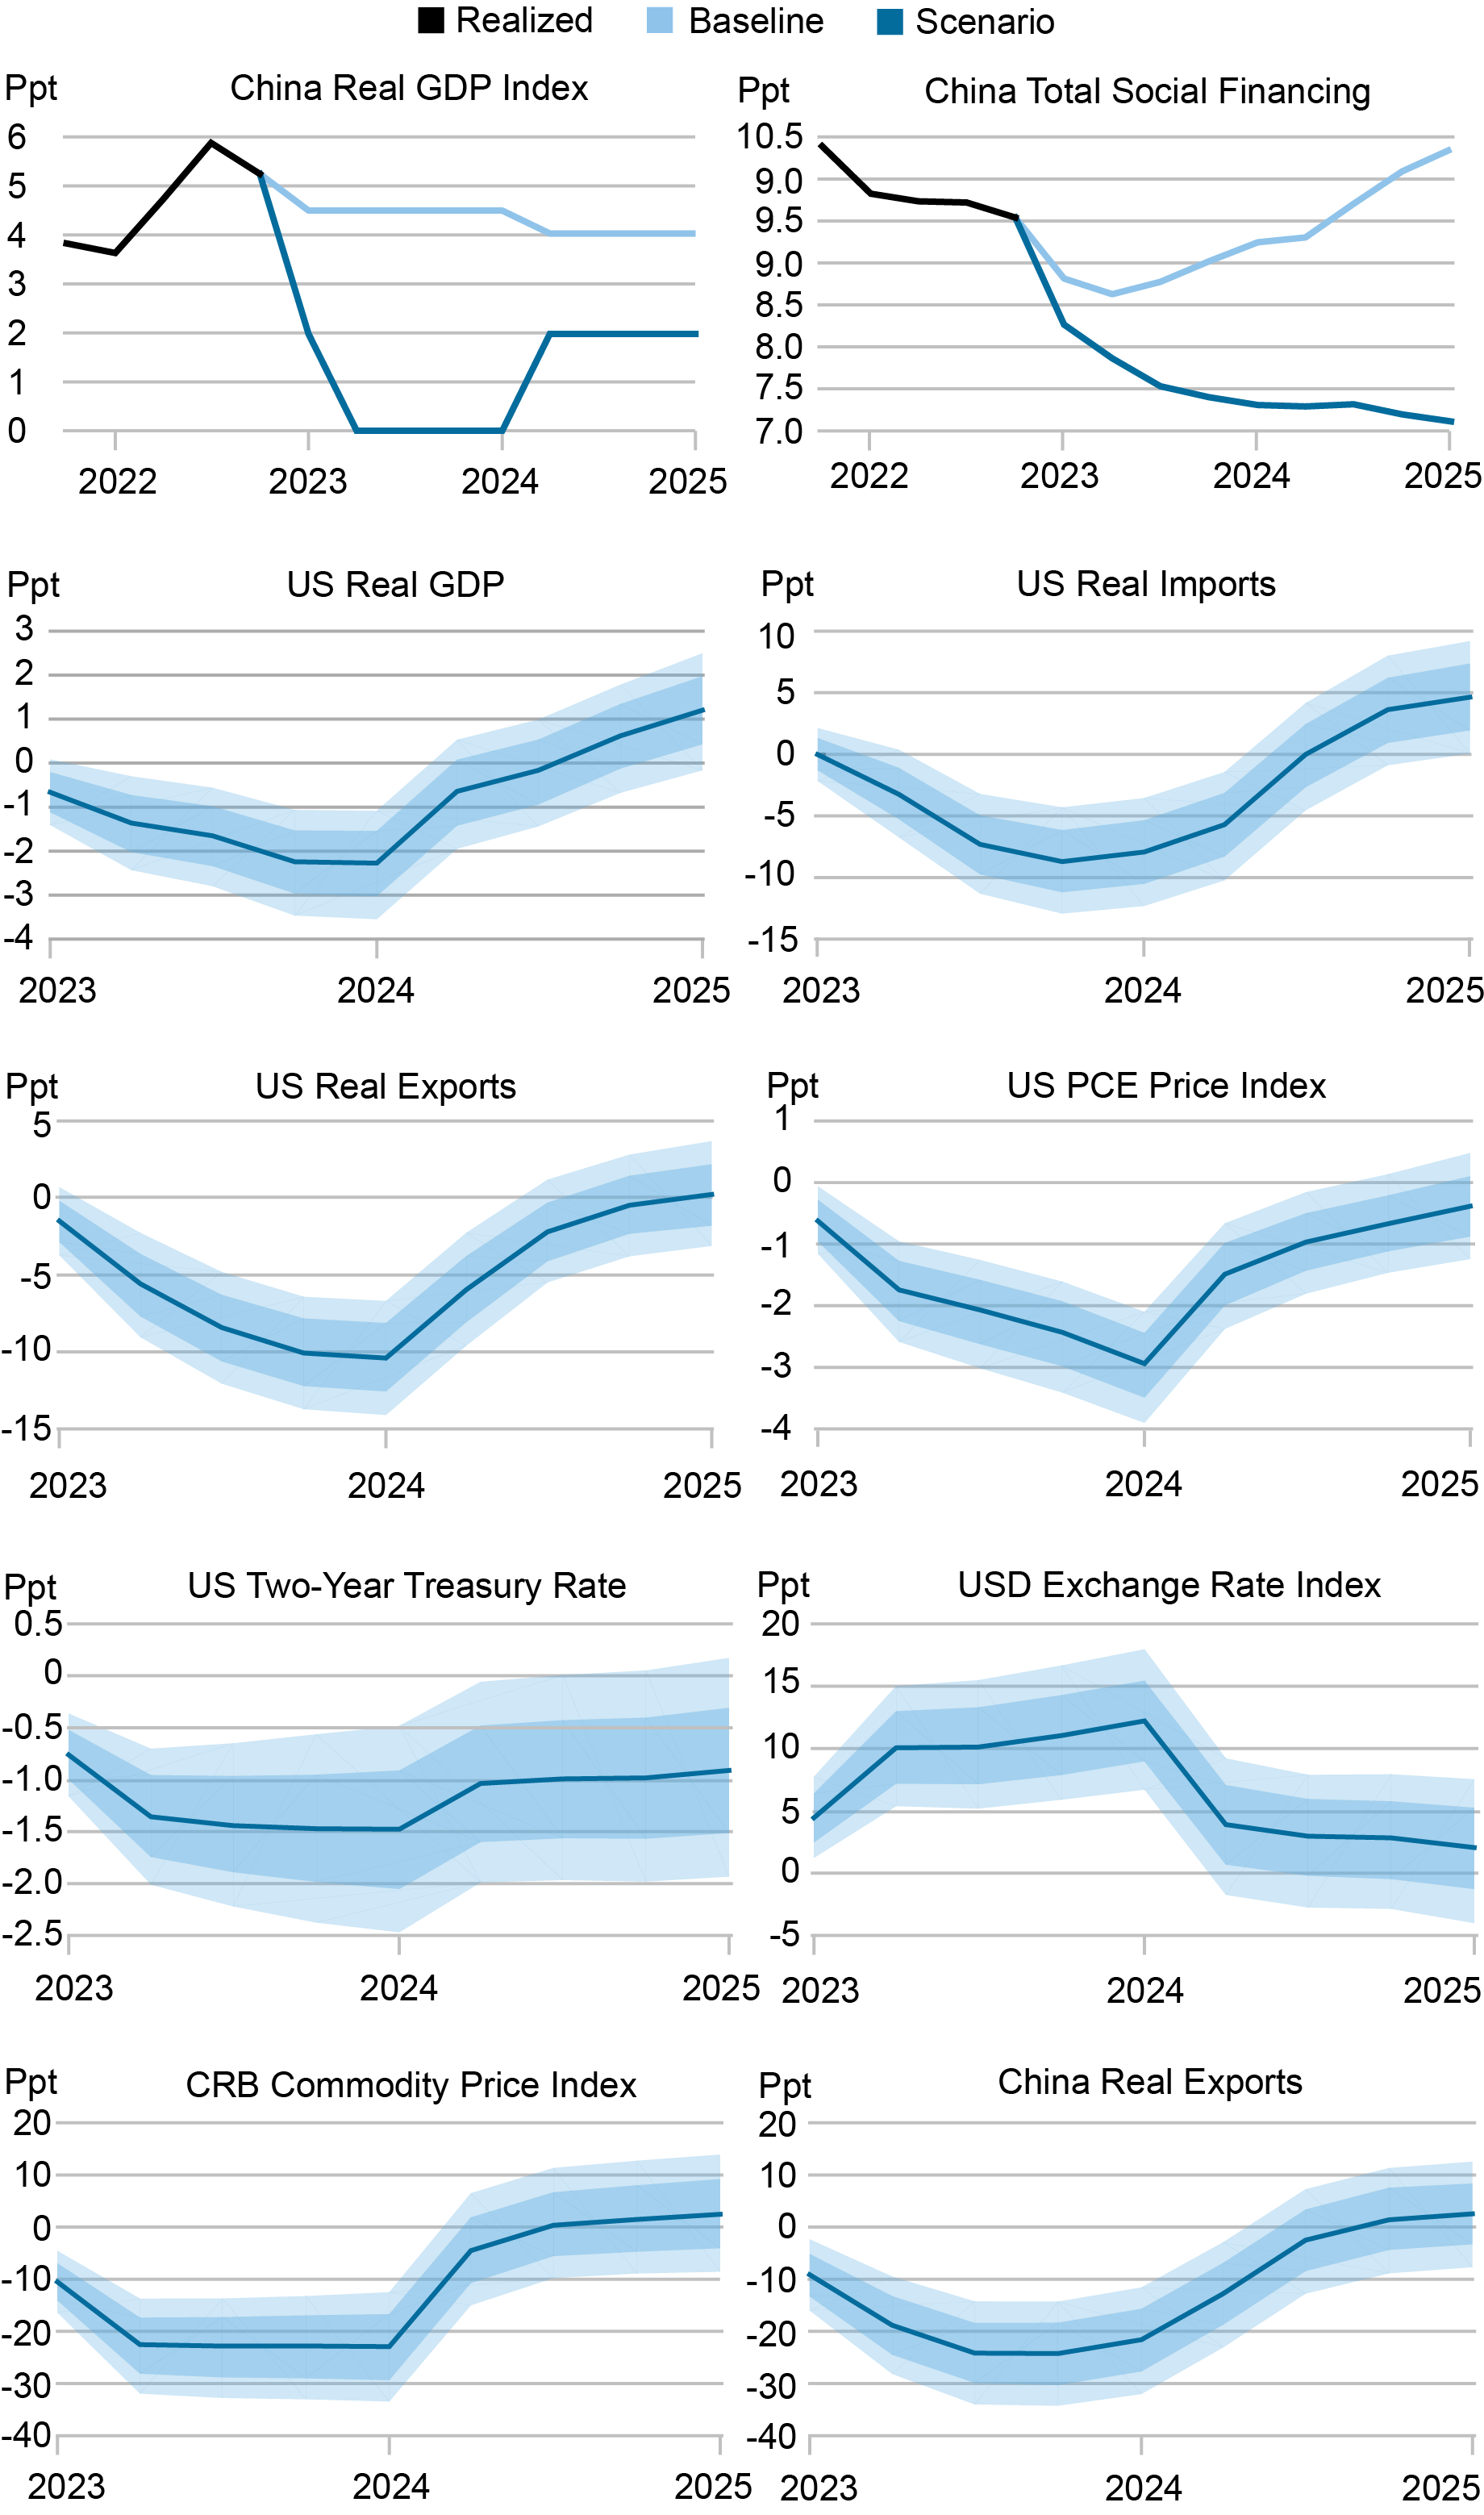 ten line charts for model-generated data; the top two depict the conditional paths of GDP and total social financing under crash and baseline scenarios; the remaining charts track possible percentage growth-rate changes from 2023 through 2025 for varying economic measurements, such as U.S. real GDP and China real exports.